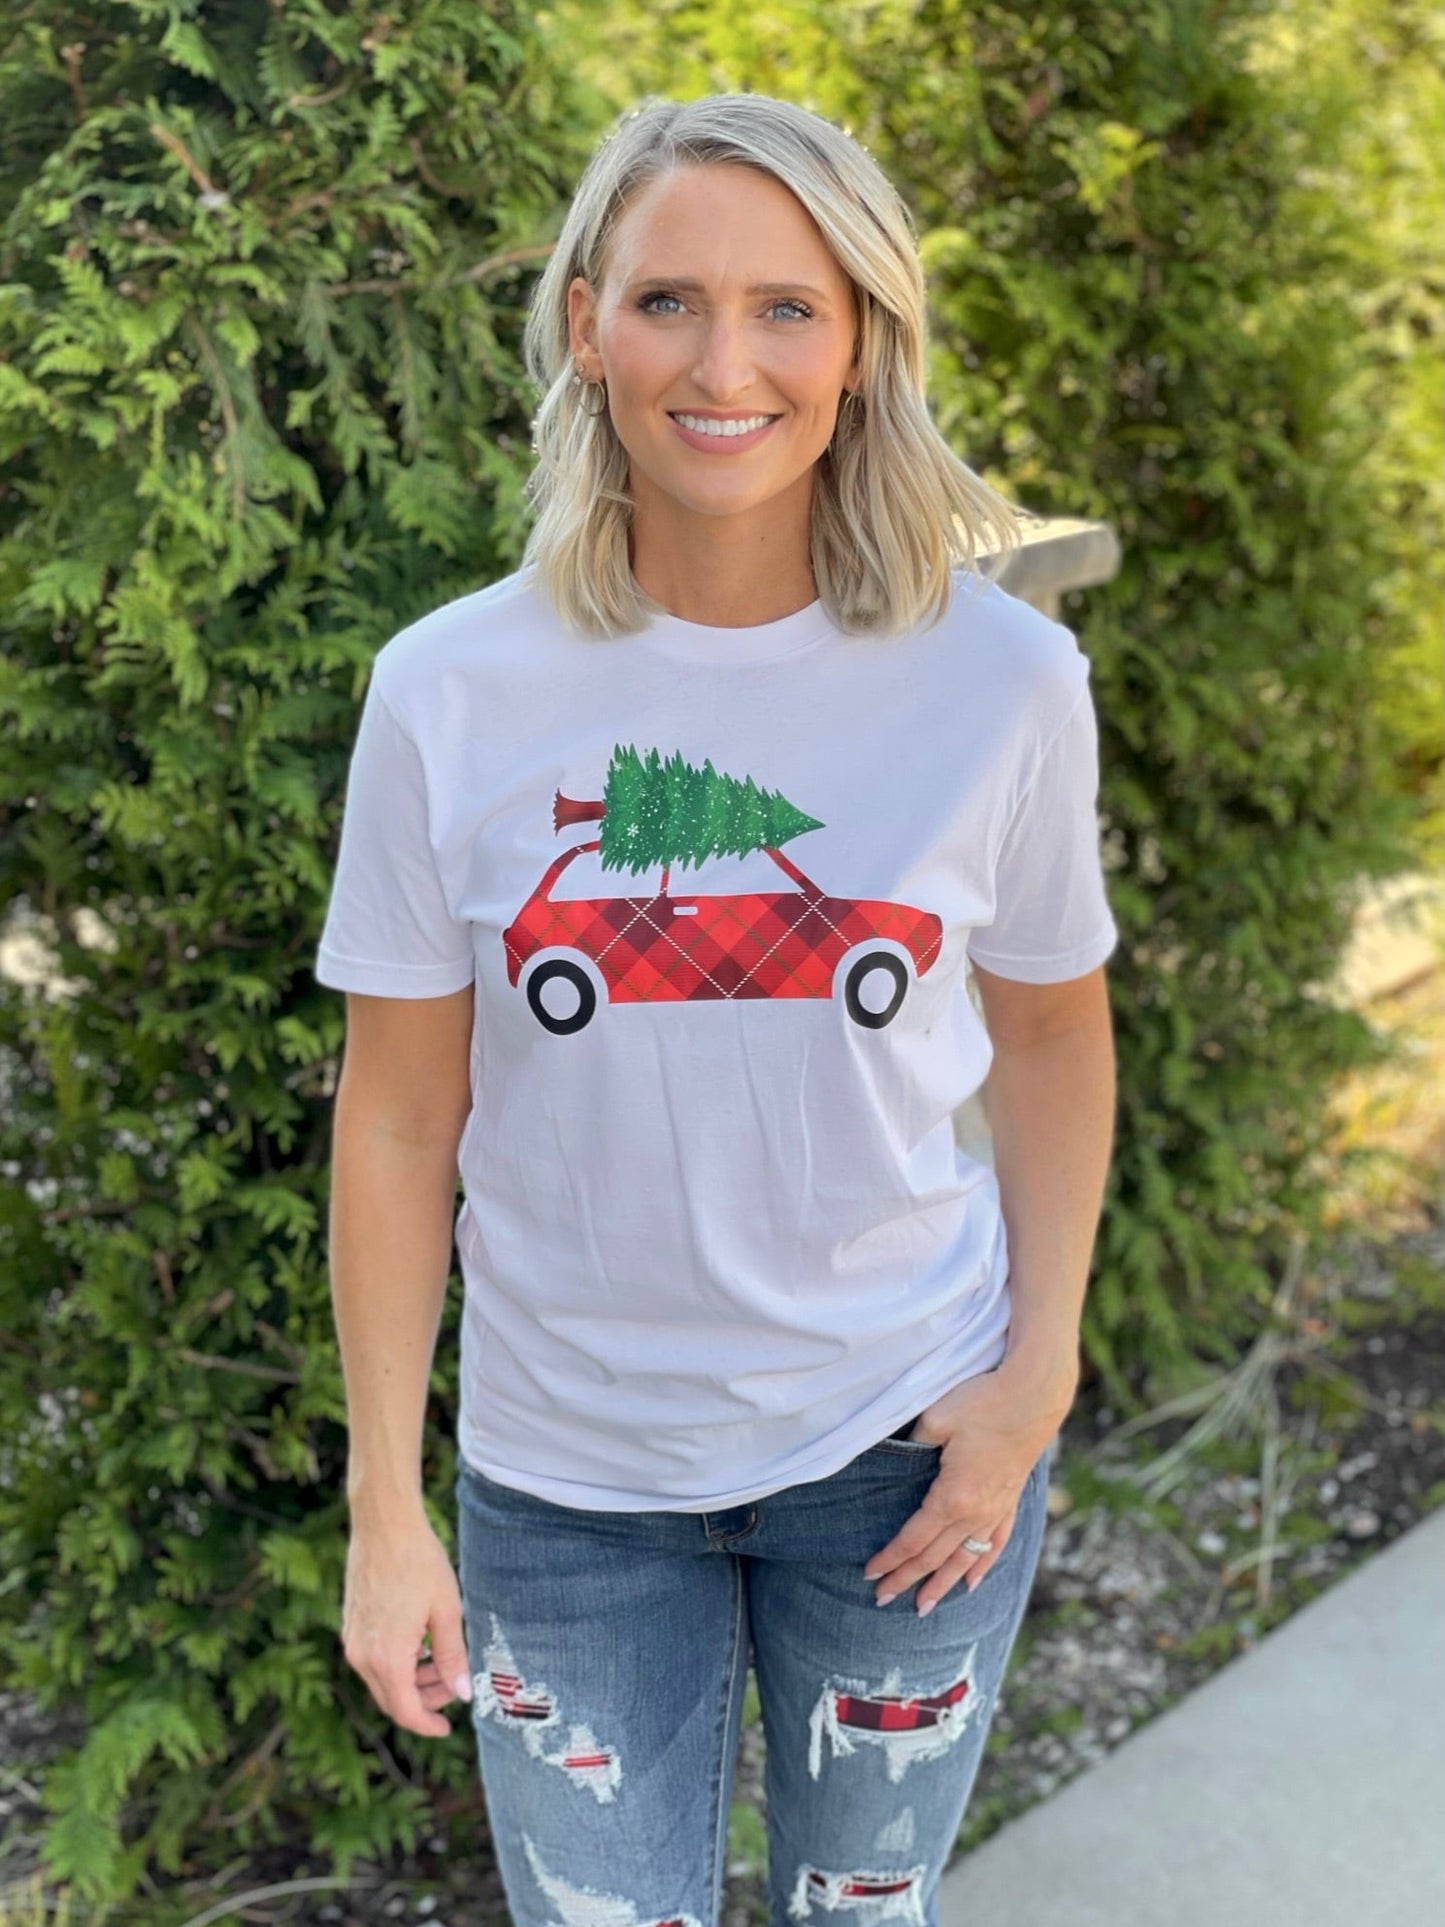 Bringing Home the Tree Graphic Tee